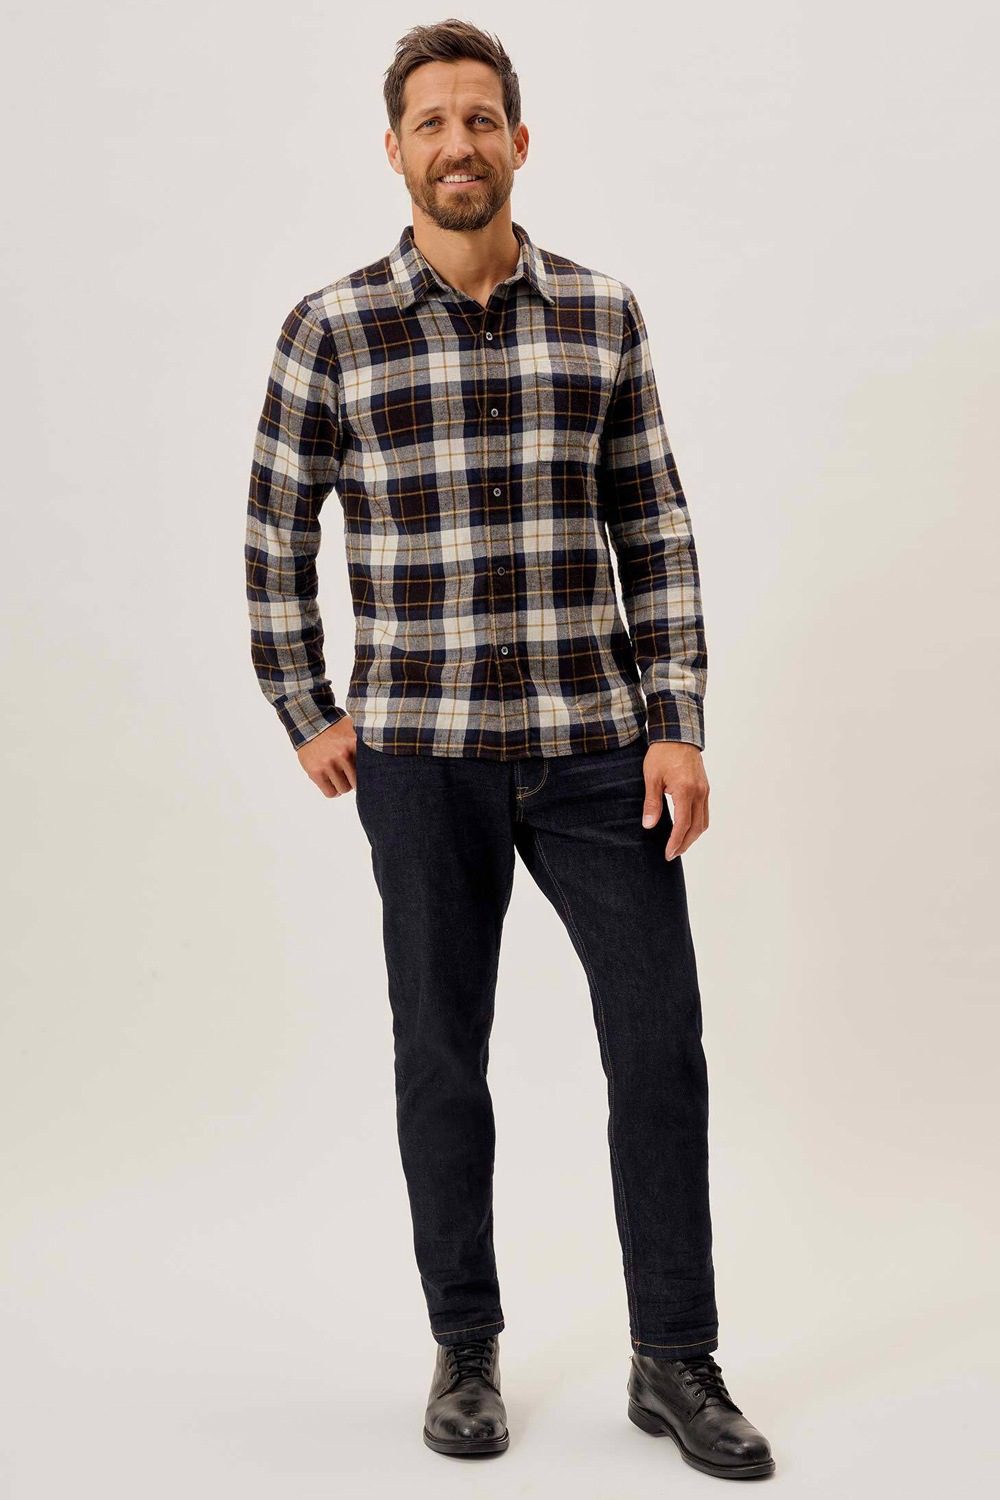 Counterfeit statement go shopping Top 4 Ways To Wear A Flannel Shirt For Men